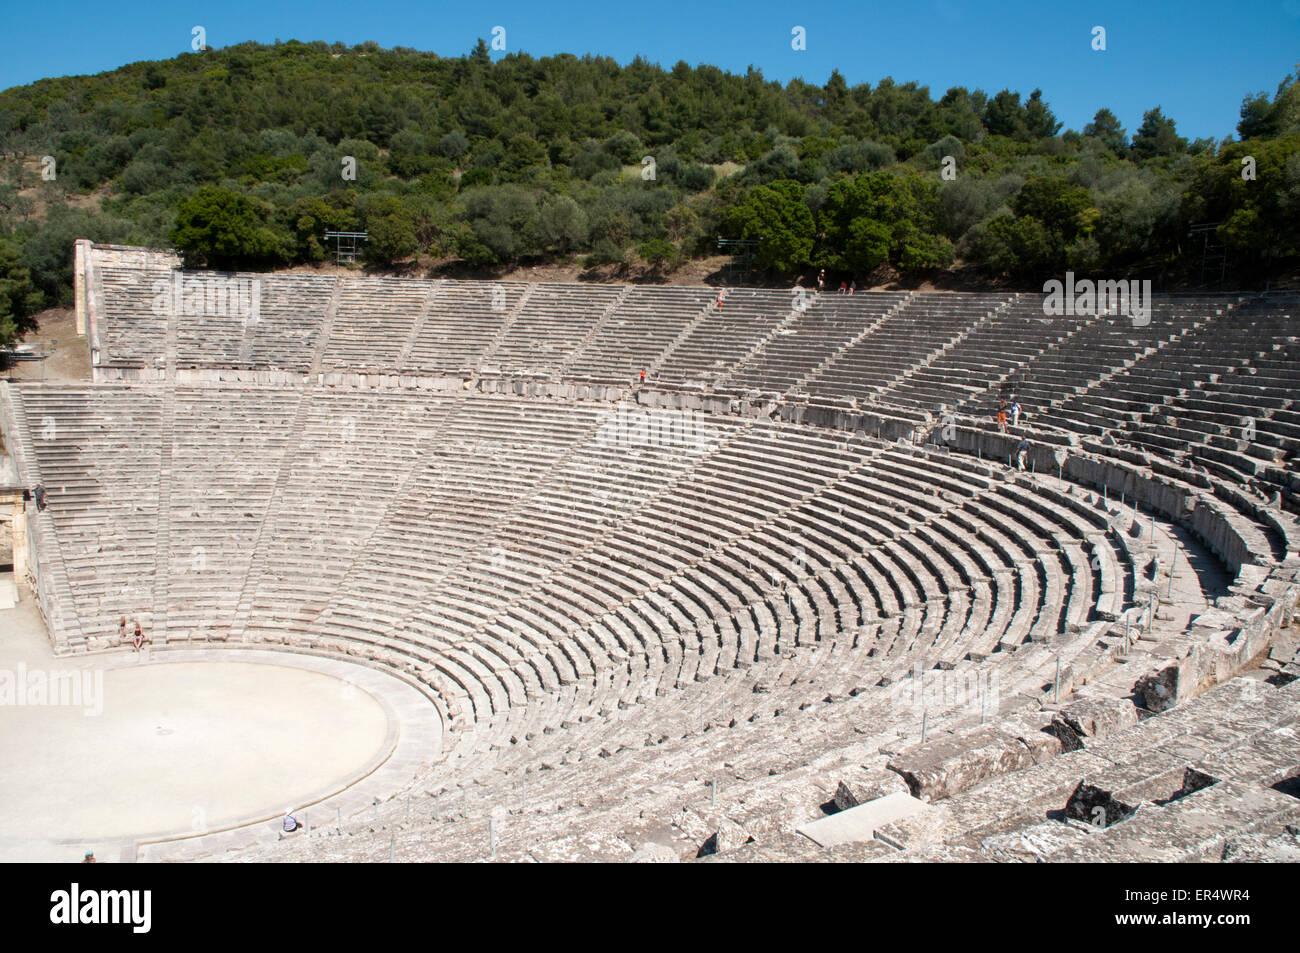 Epidaurus was the most celebrated healing center of the classical world. Its theater is well known for its superb acoustics. Stock Photo